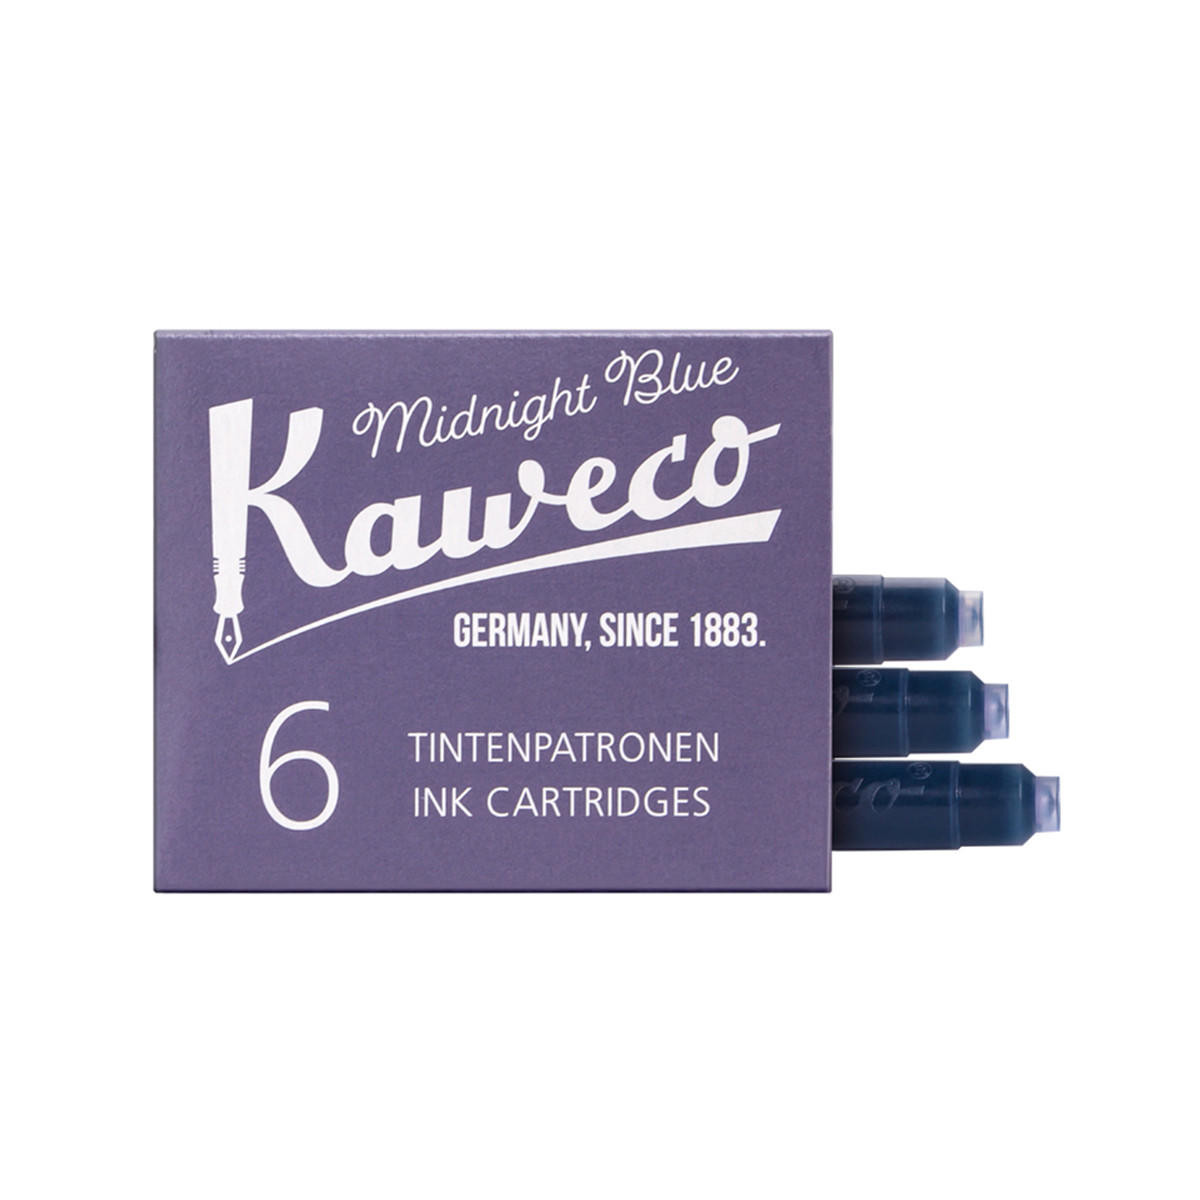 Kaweco Ink Cartridges Midnight Blue Pack of 6